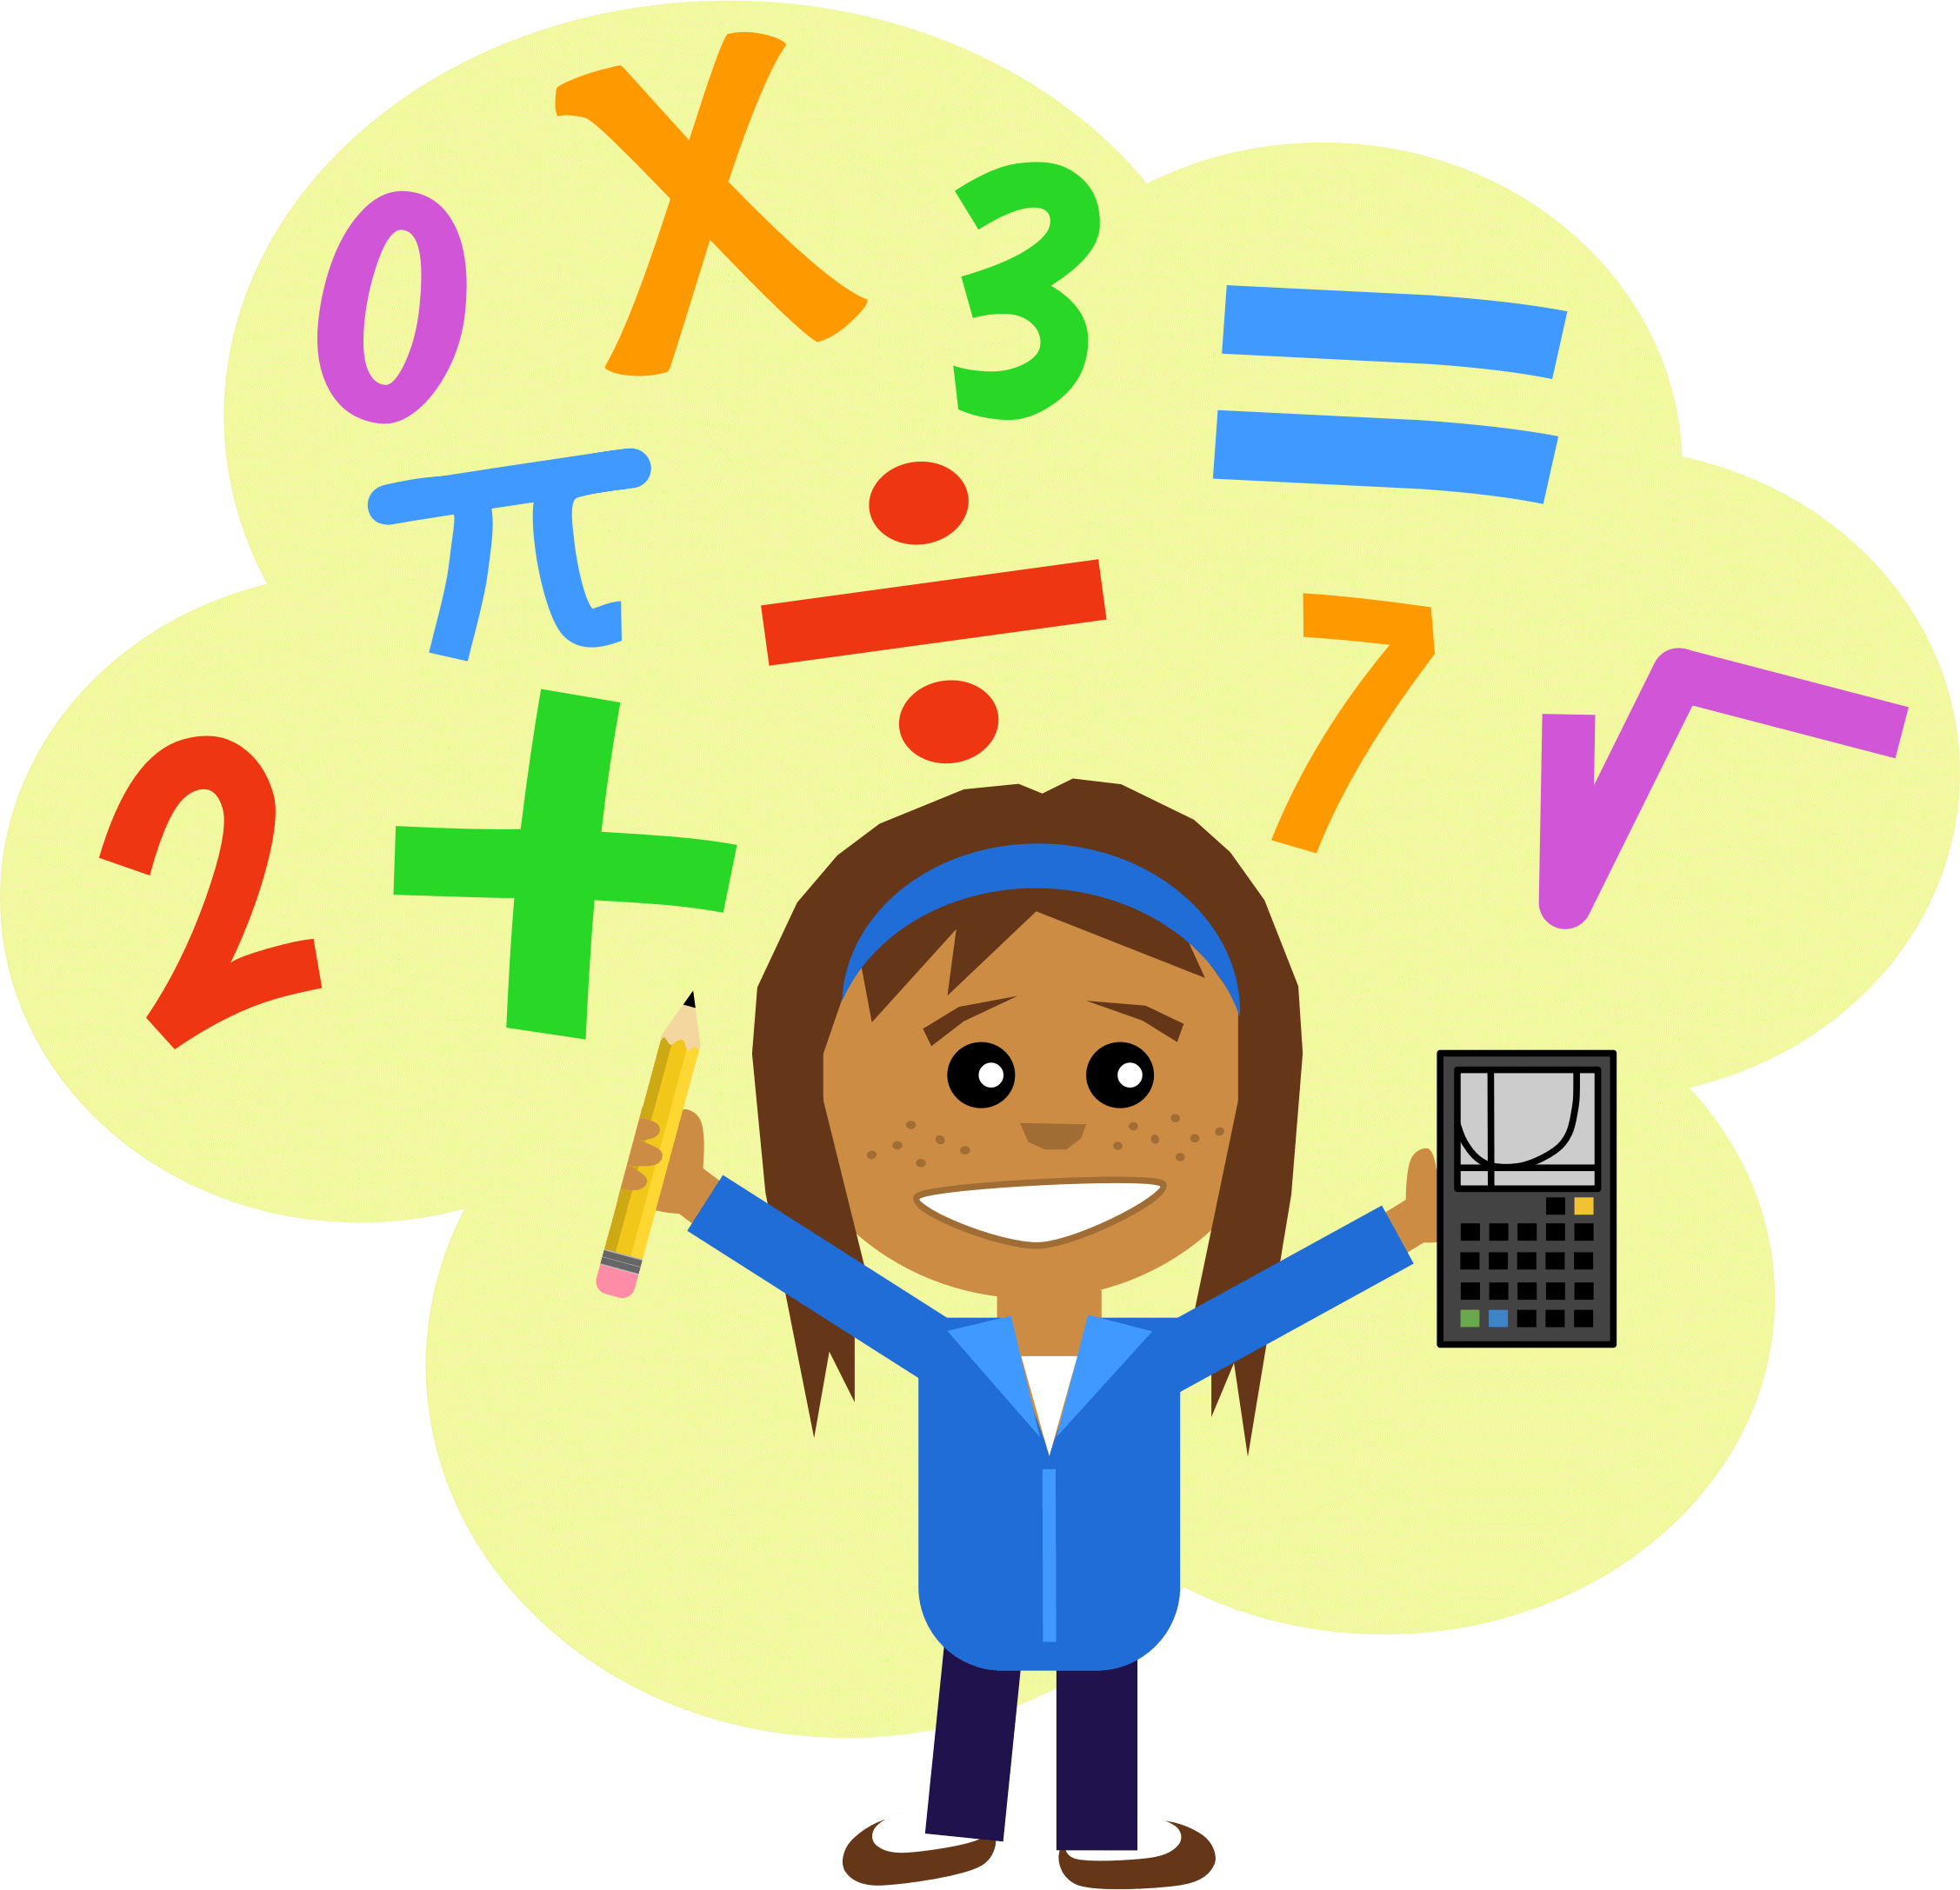 Clip Art Of Math In Primary School Students Clipart